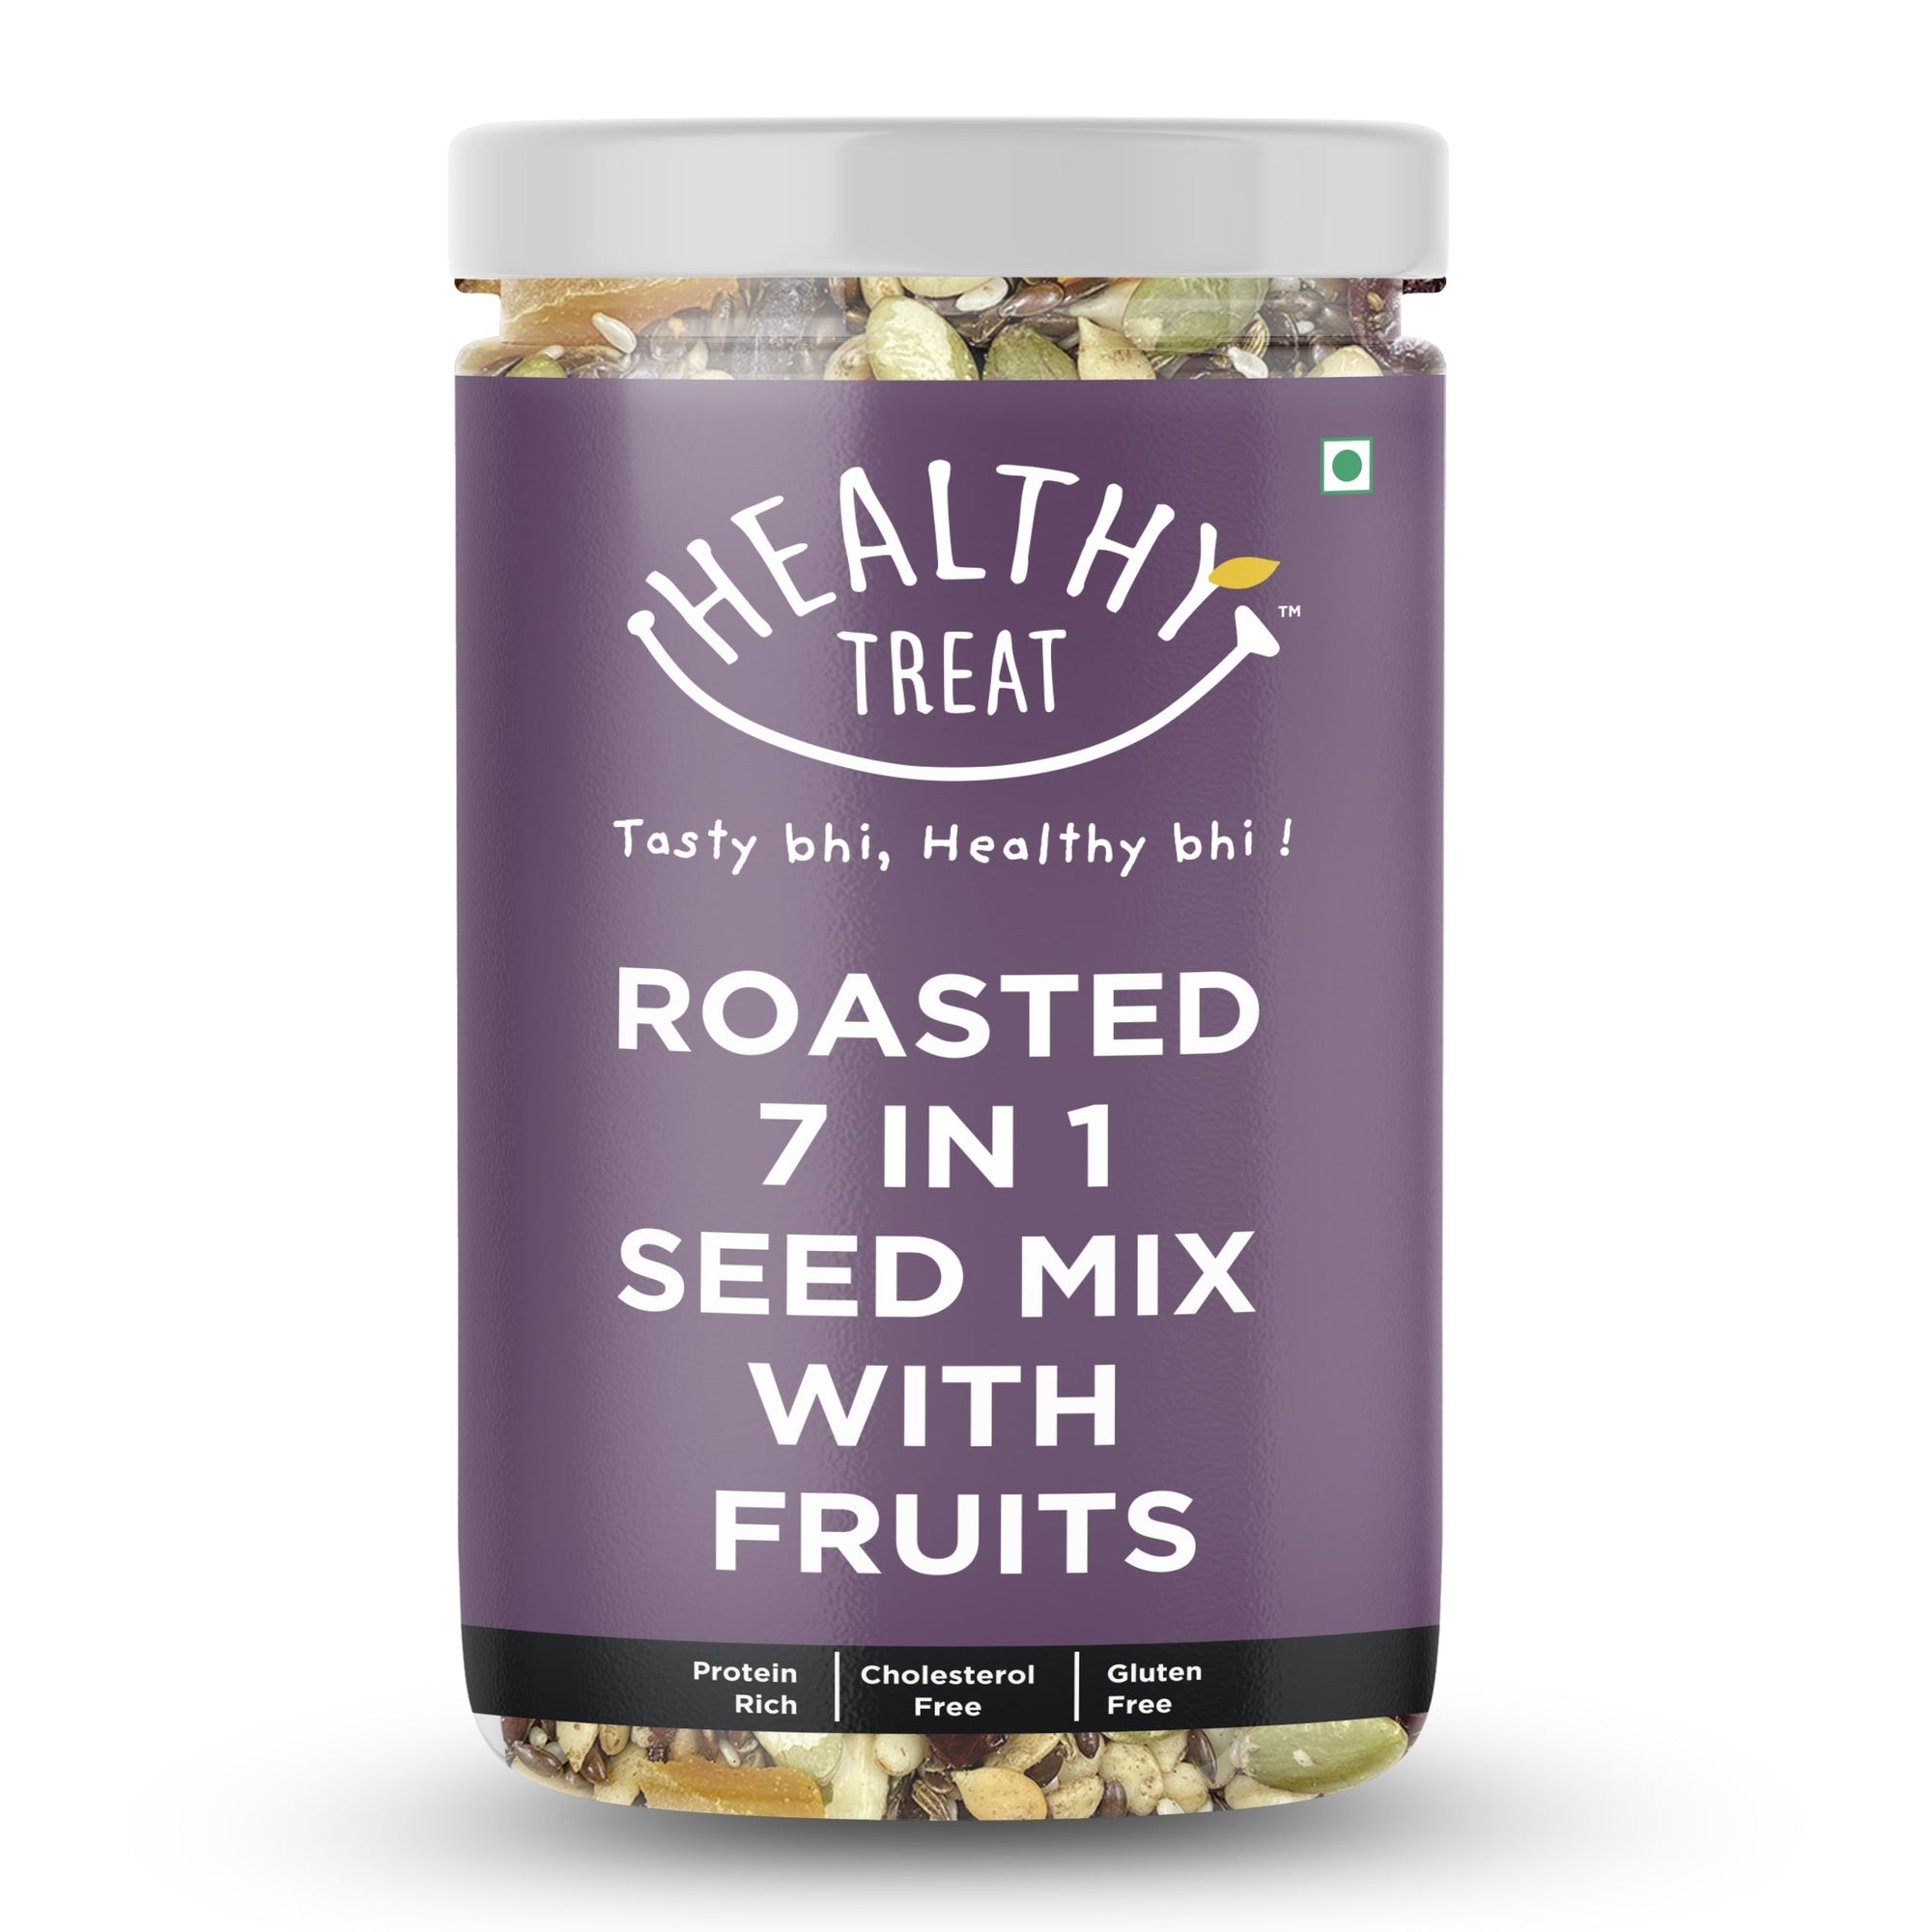 Roasted 7 in 1 Seed Mix with Fruits (100 gm).